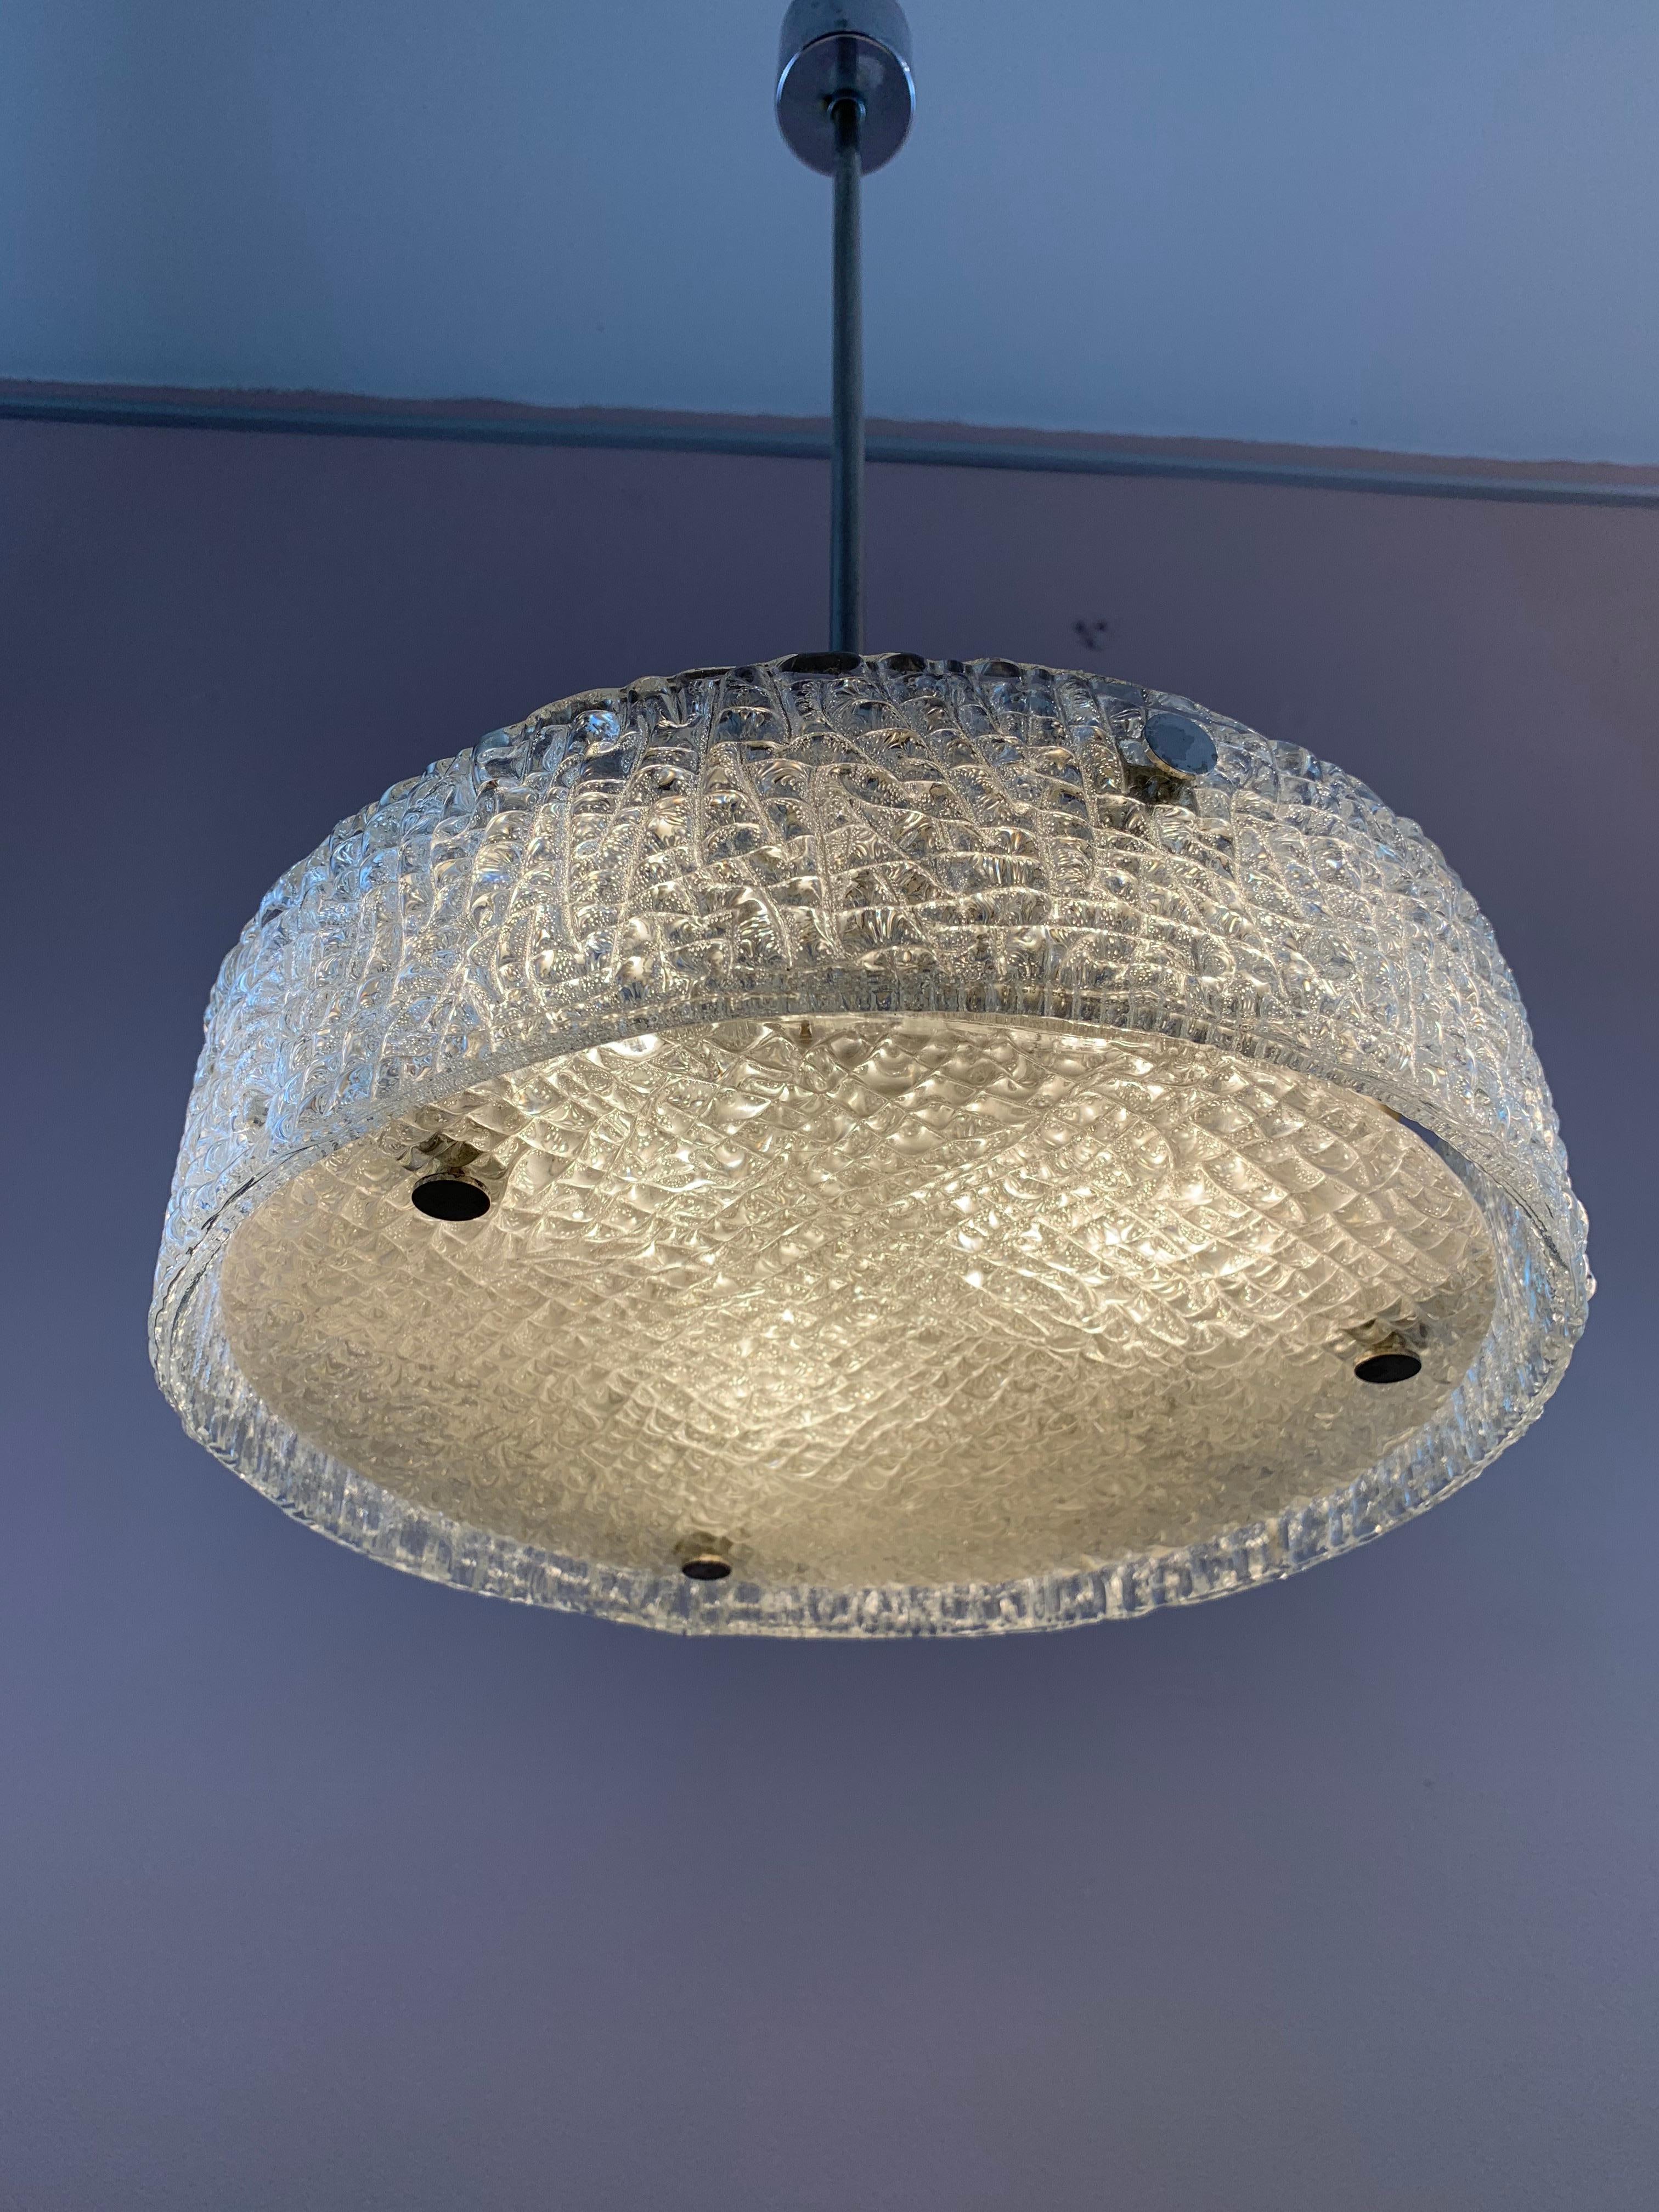 A midcentury, textured, ice-glass, hanging, ceiling, pendant light, which was manufactured in Germany, by Kaiser Leuchten in circa 1960s. The rod can be unscrewed and removed if you require a flush mounted ceiling light instead. The thick textured